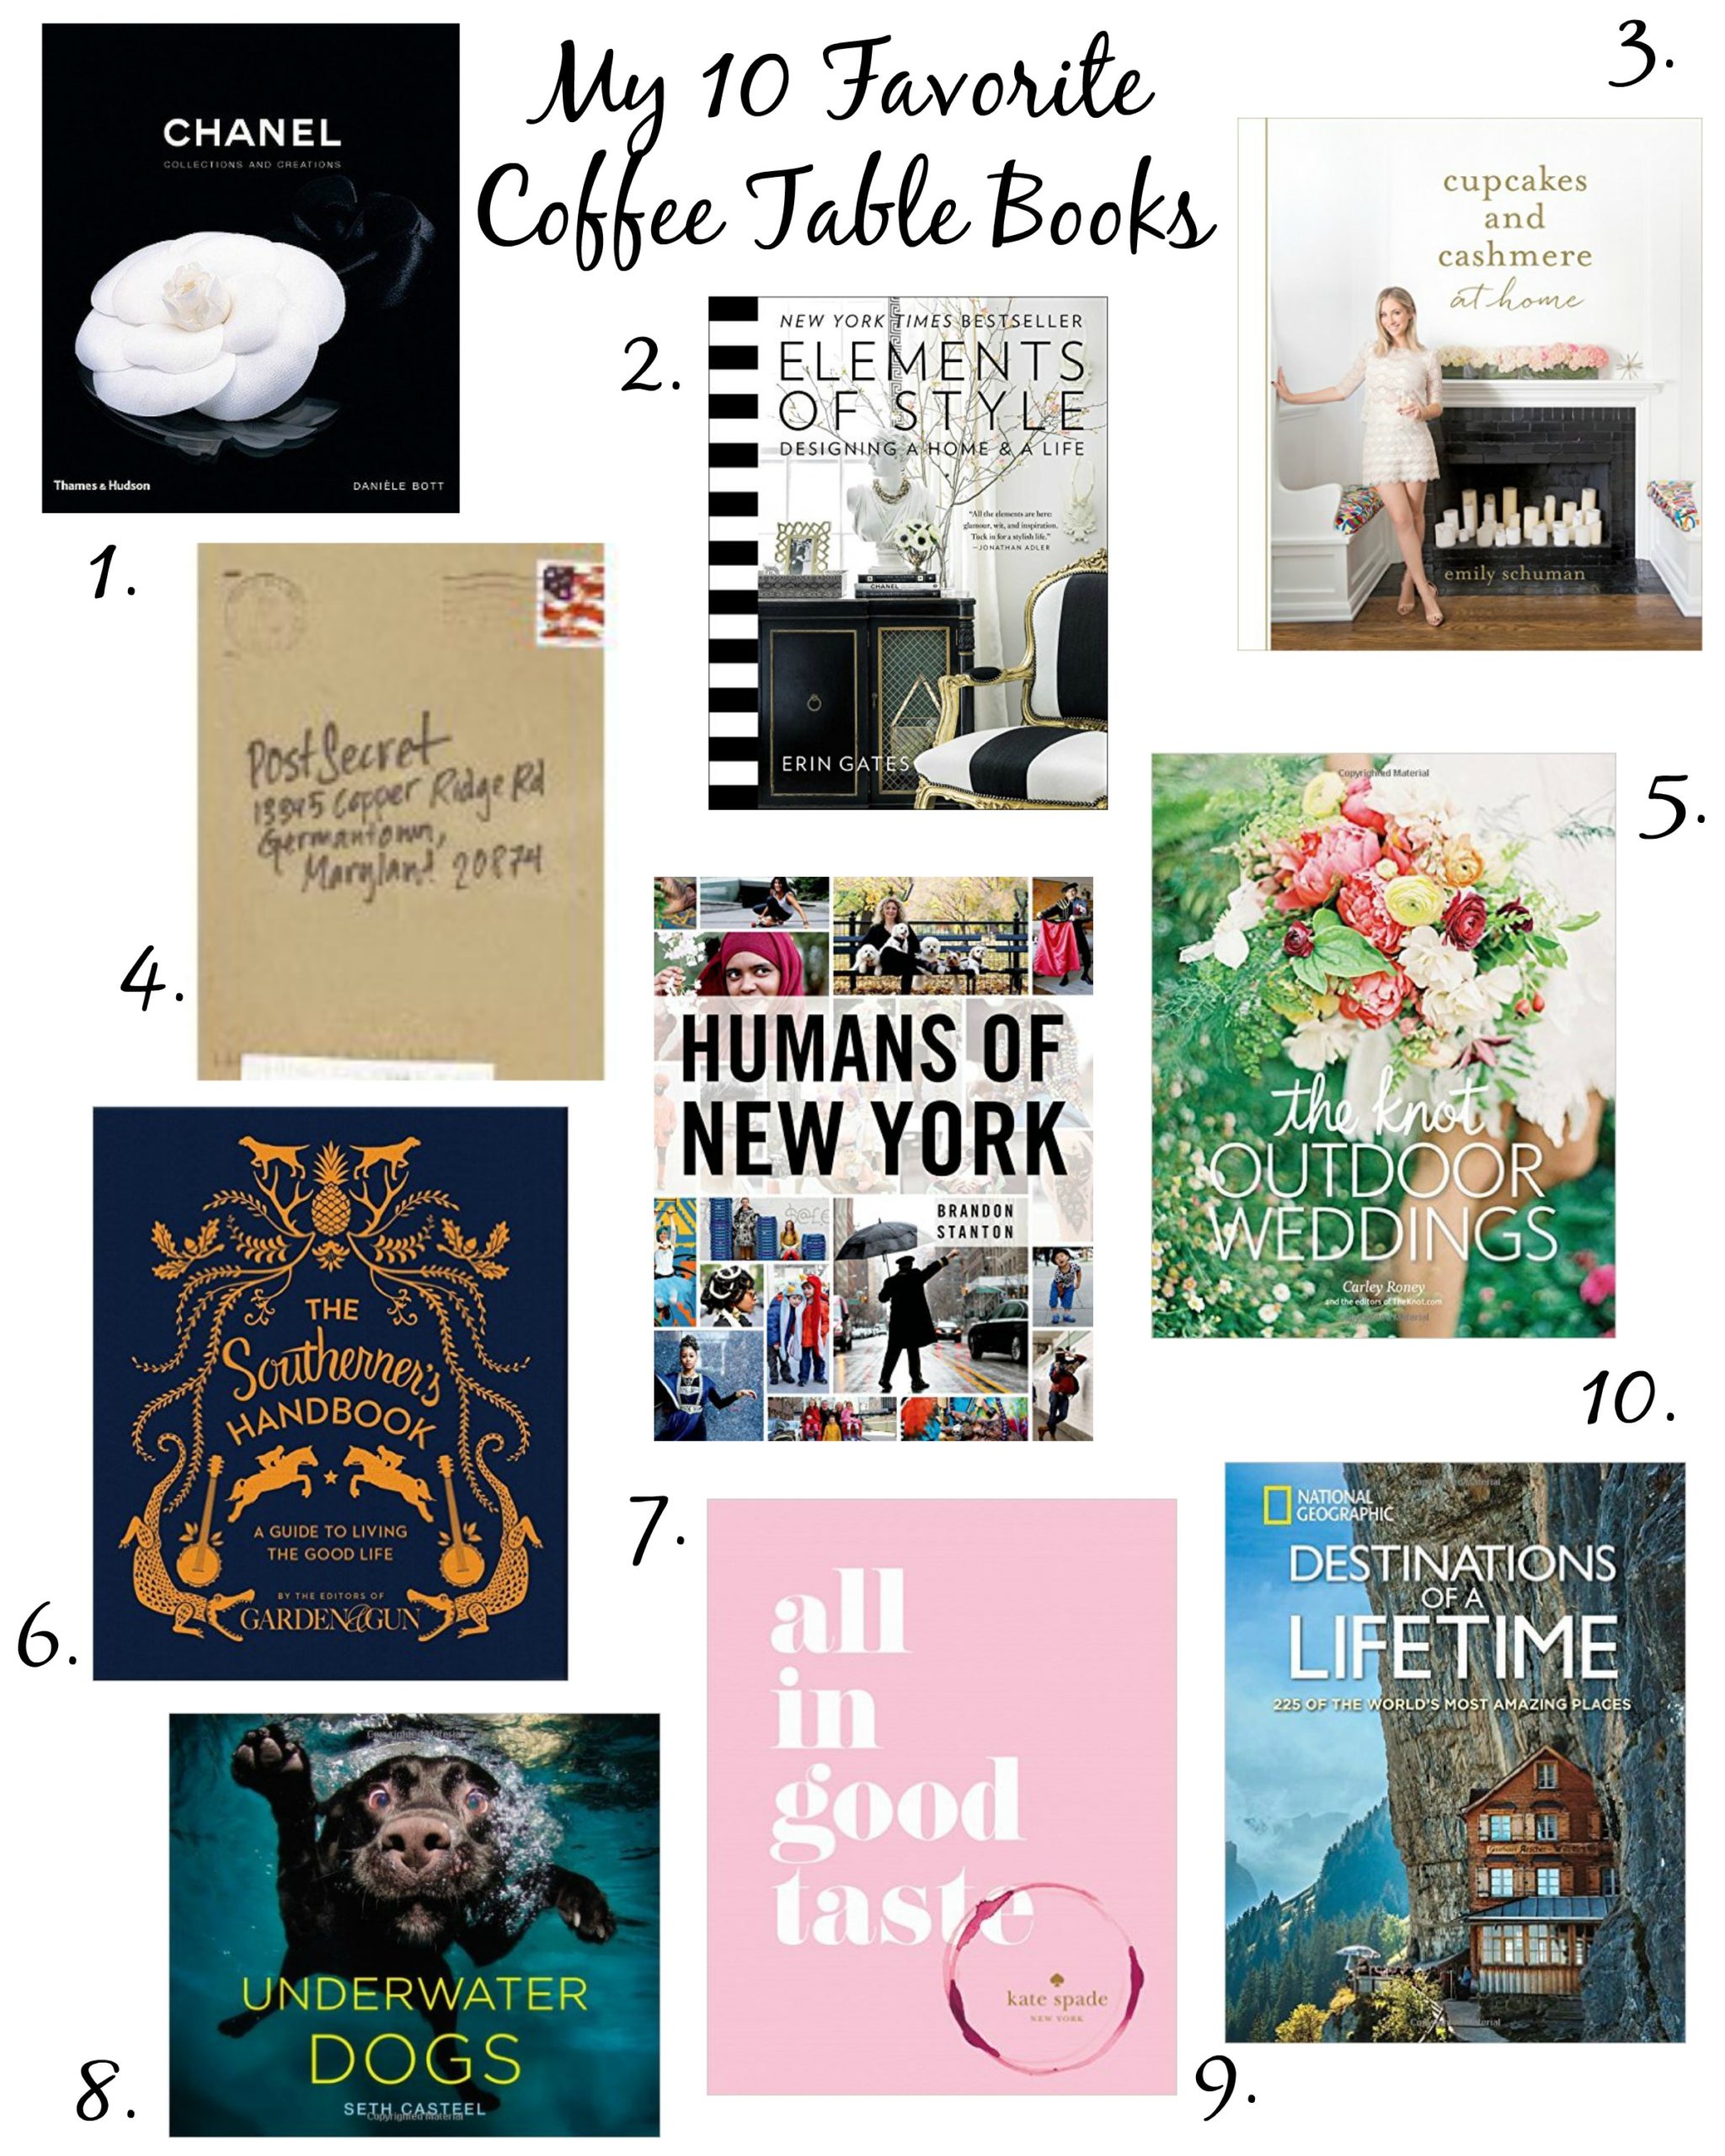 My 10 Favorite Coffee Table Books